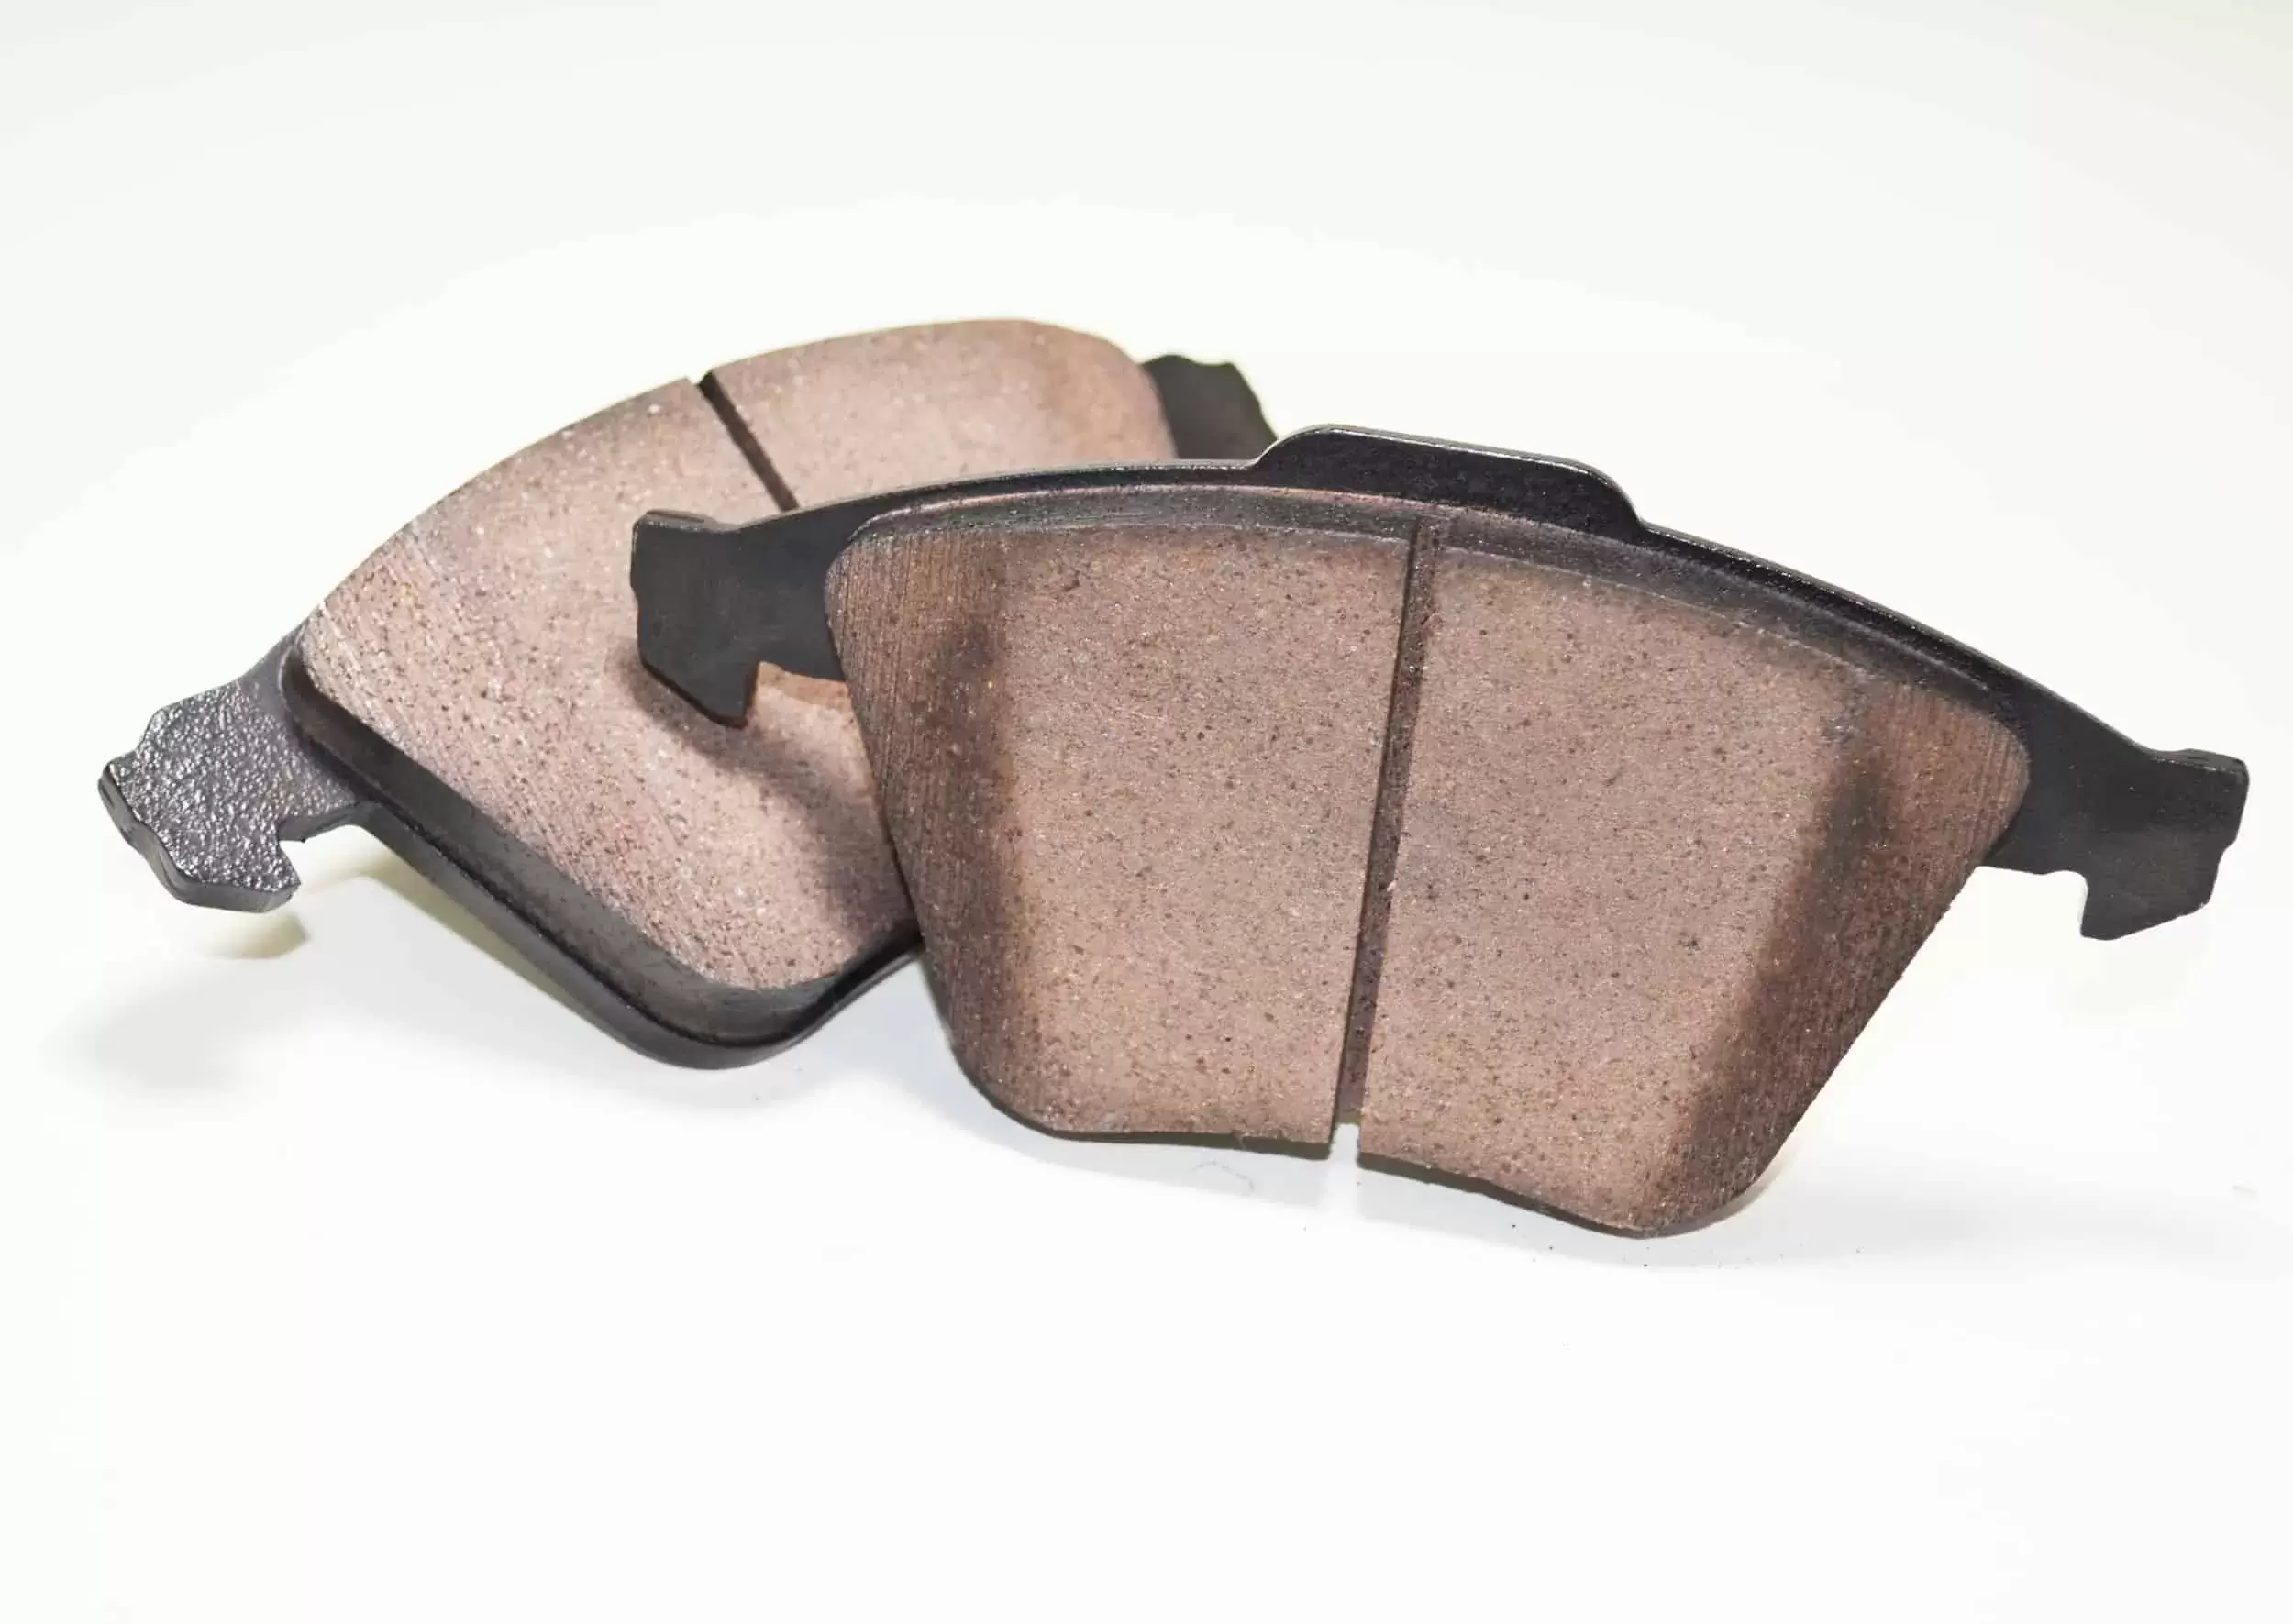 The pads compound is a semi metallic and ceramic mix to givec excellent feedback under braking in your Speed3